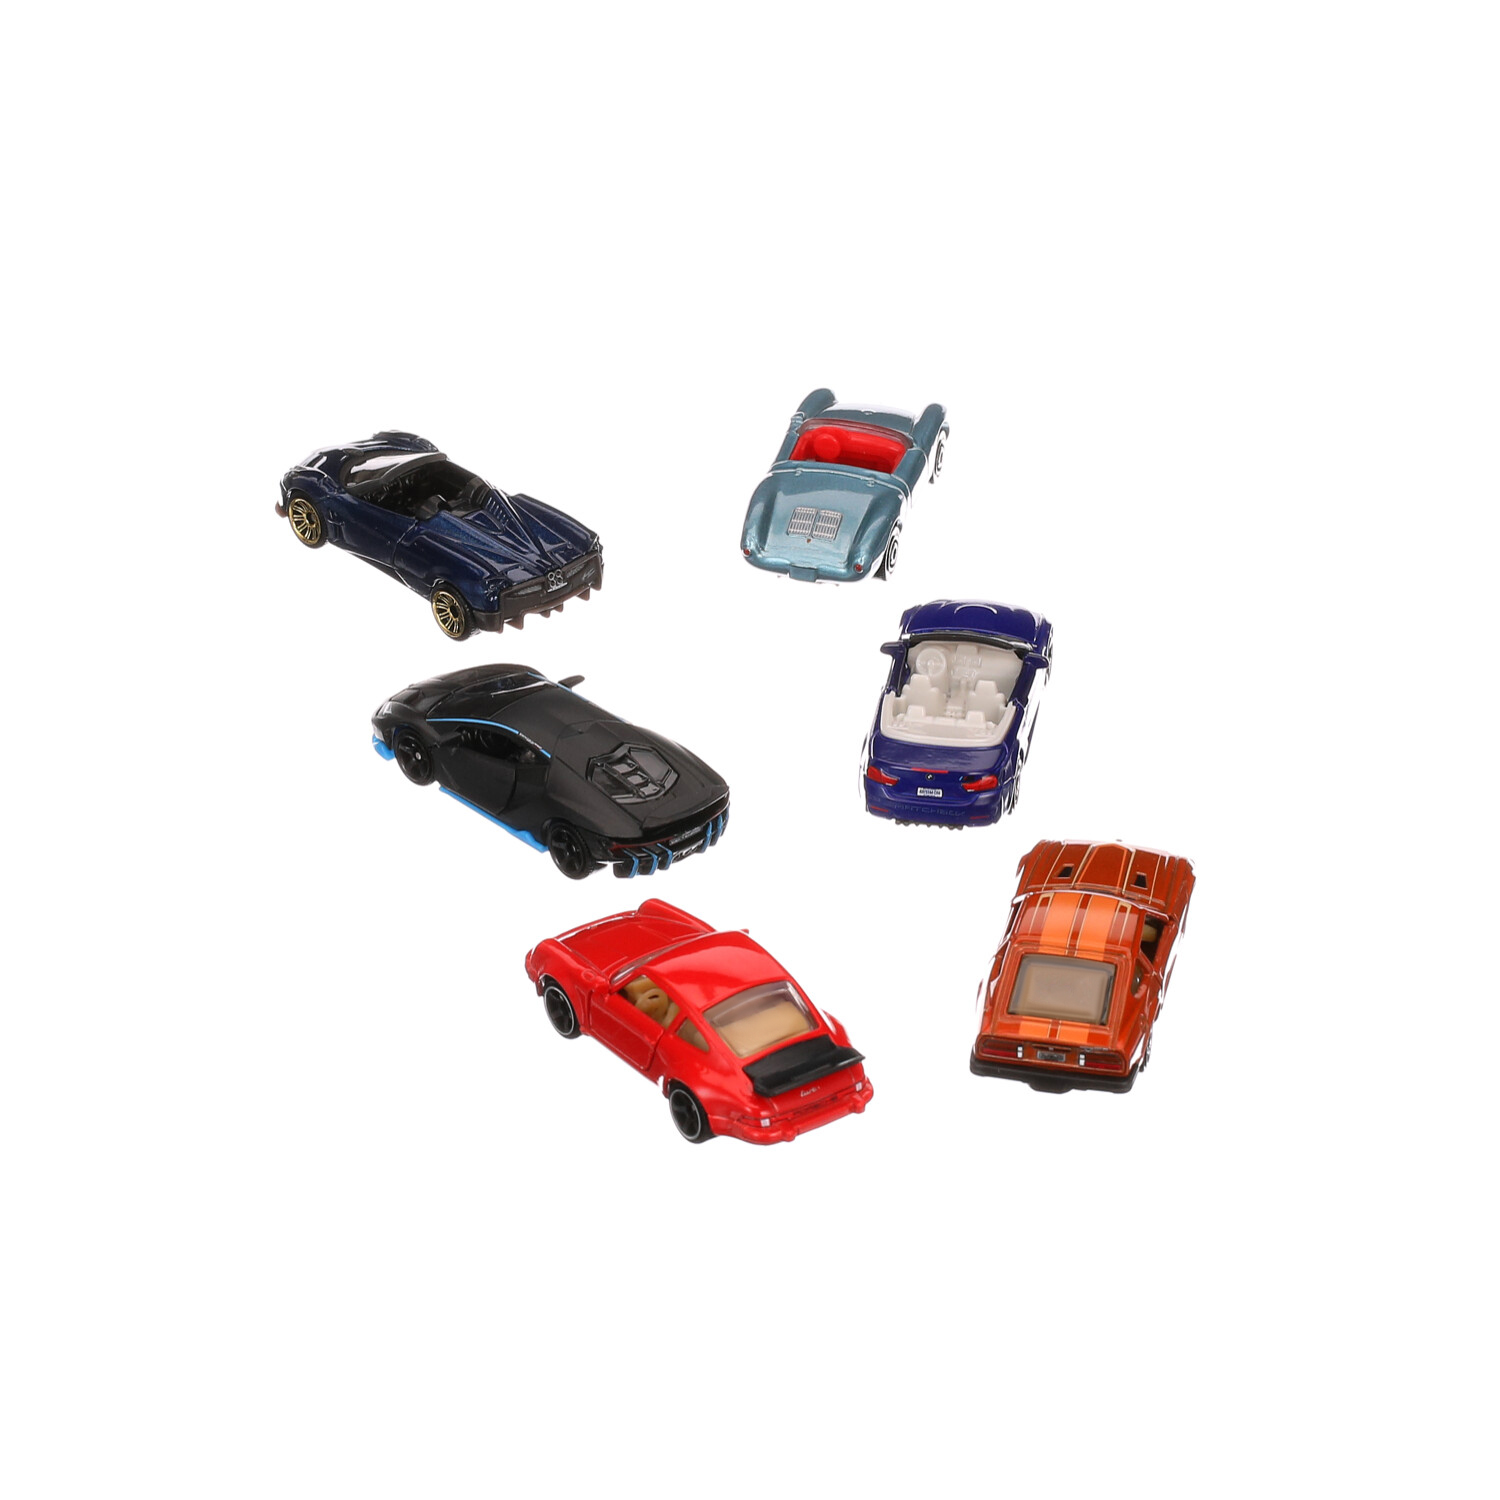 Matchbox Moving Parts 6-Pack of Toy Sports Cars in 1:64 Scale with a Moving  Part (Styles May Vary)